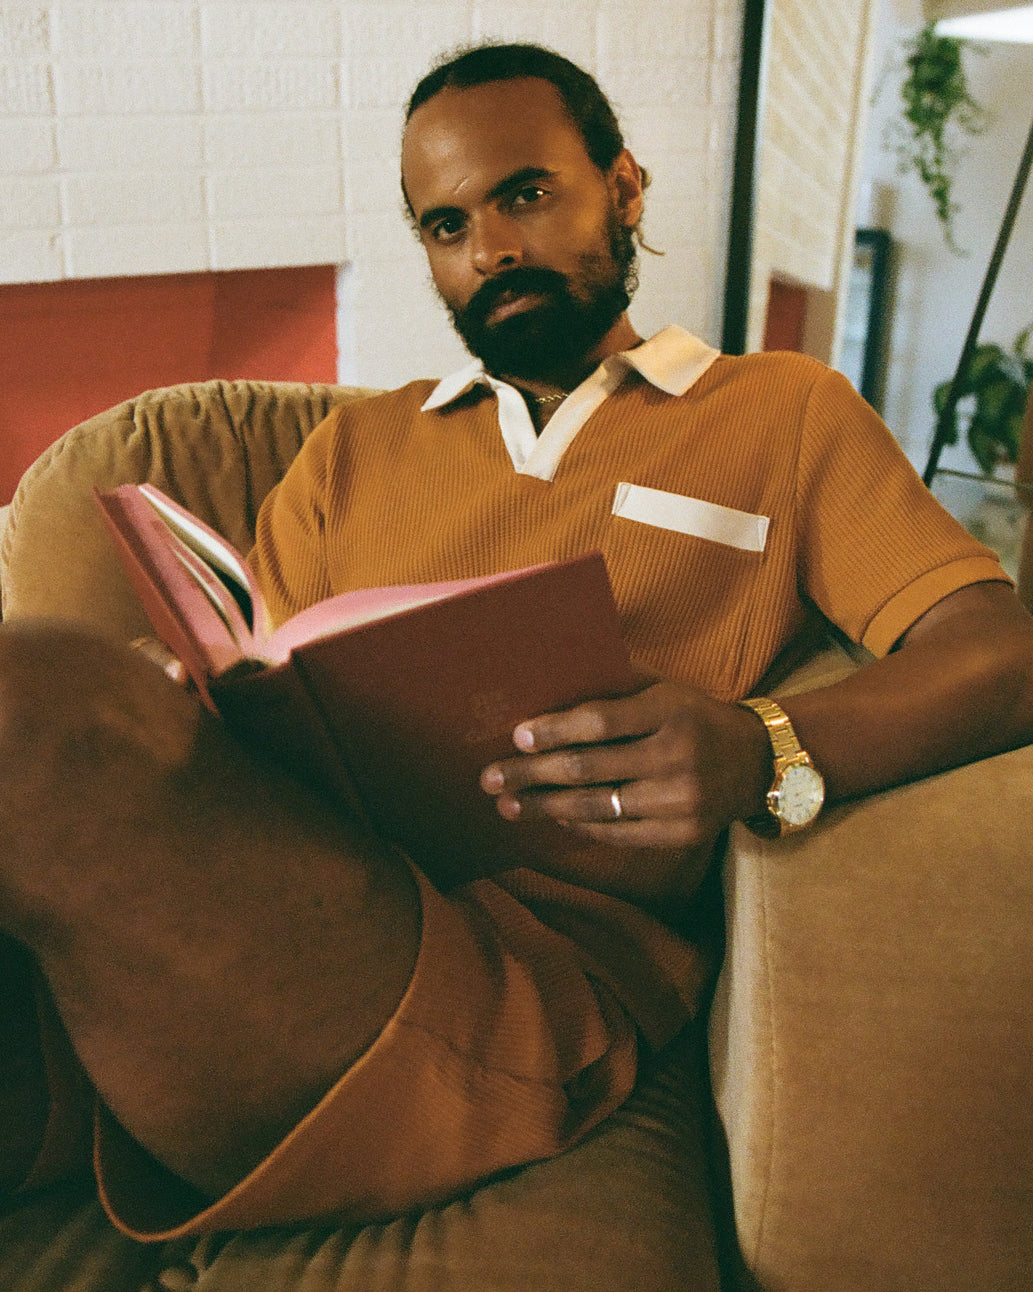 man sitting , having book in hand and wearing dandy del cloths